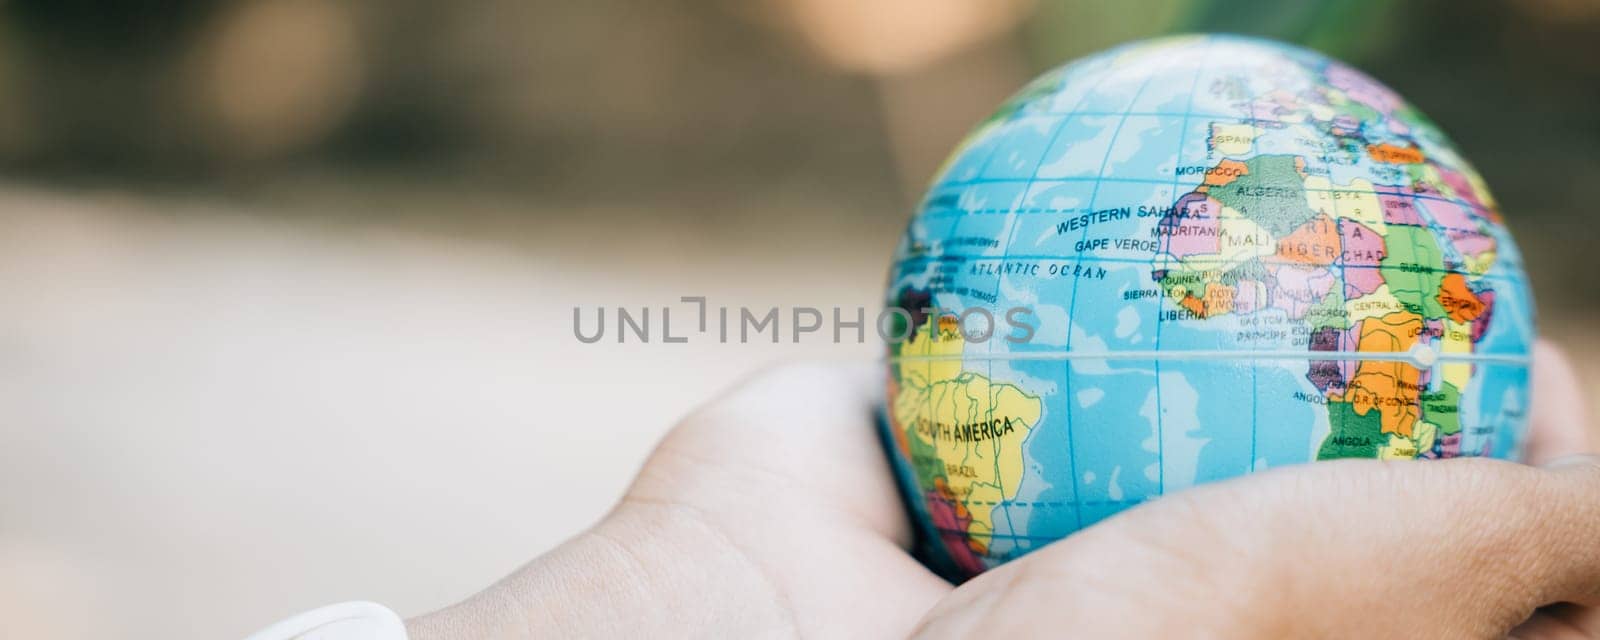 Embrace the Green Planet in your hands to signify Earth's preservation. This concept for Environment and Earth Day embodies responsibility, wisdom, and global support for our environment and nature. by Sorapop